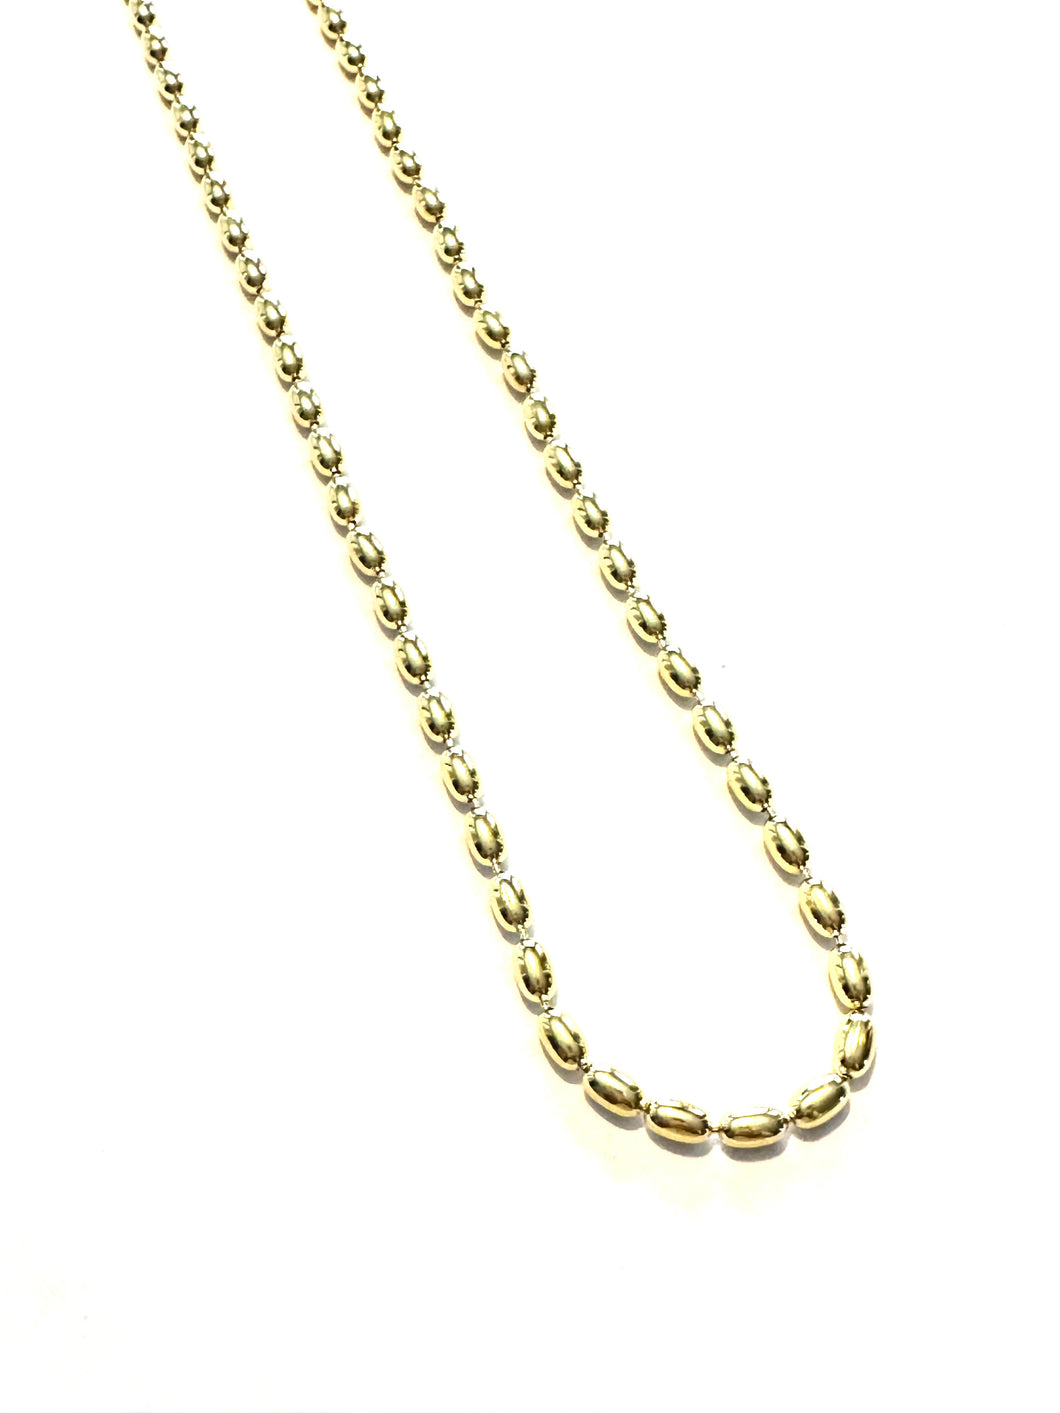 NEW Extra Large Gold Plated Sterling Rice Bead Necklace